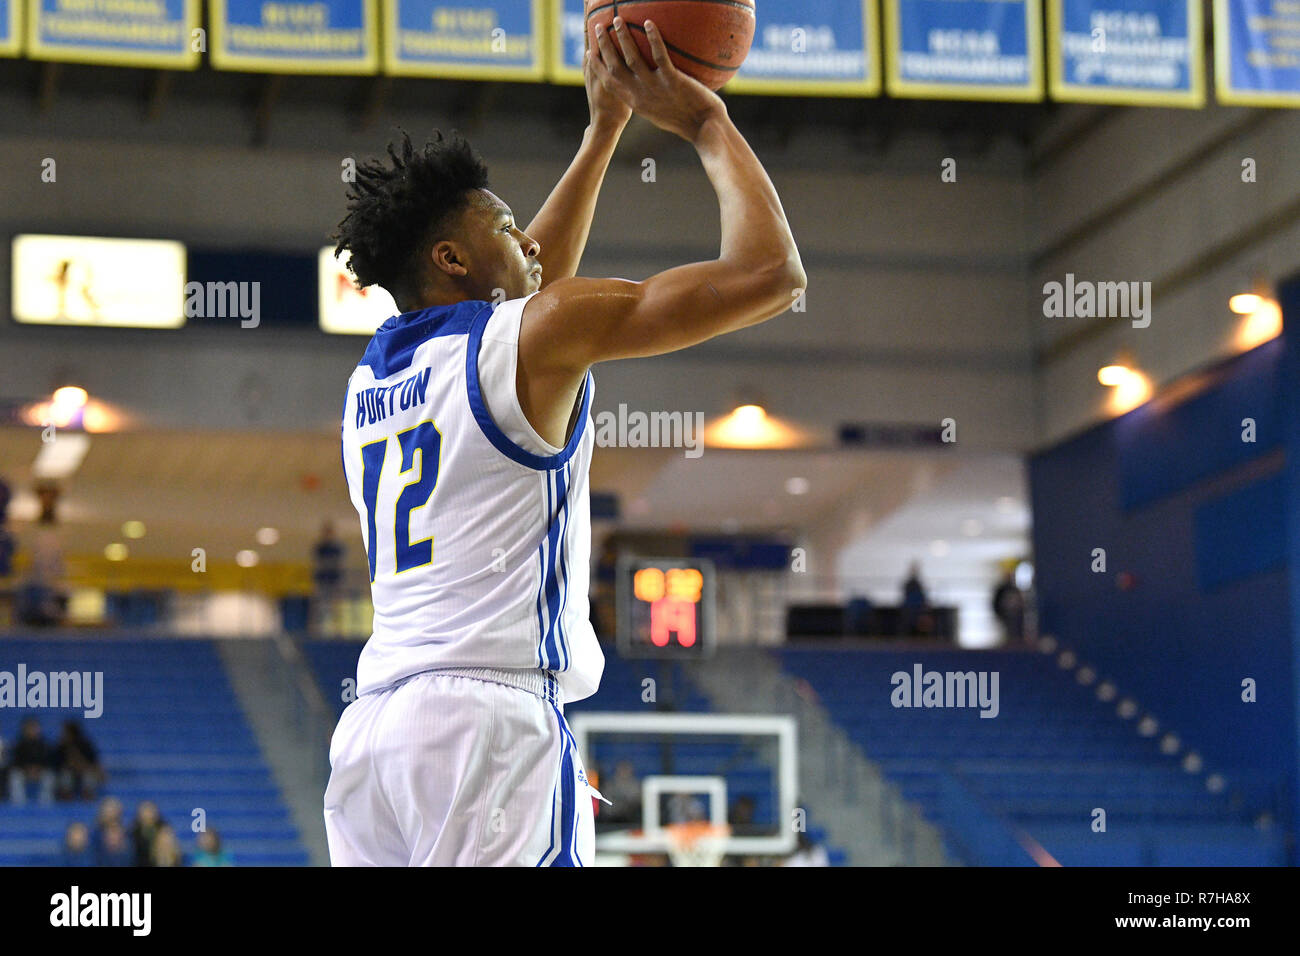 Newark, Delaware, USA. 9th Dec, 2018. Delaware Fightin Blue Hens guard ITHIEL HORTON (12) shoots a jumper during the basketball game played at the Bob Carpenter Center in Newark, DE. The Blue Hens beat the Red Flash 88-83. Credit: Ken Inness/ZUMA Wire/Alamy Live News Stock Photo